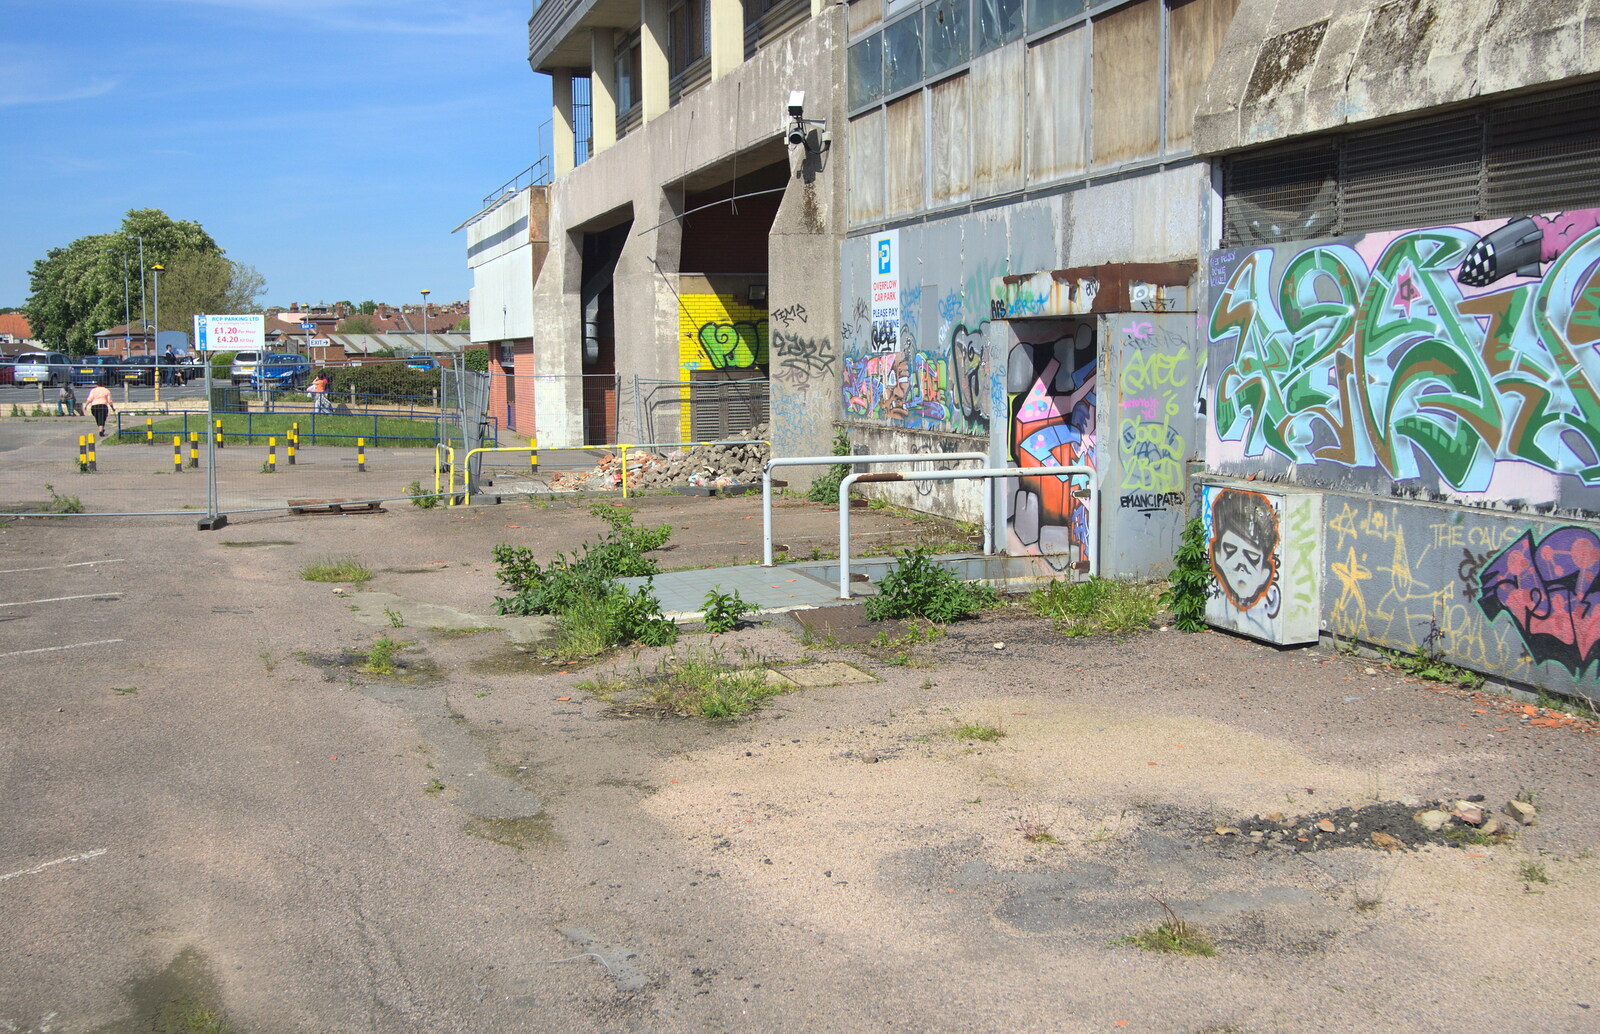 A view of the loading bay from The Dereliction of HMSO, Botolph Street, Norwich - 26th May 2013